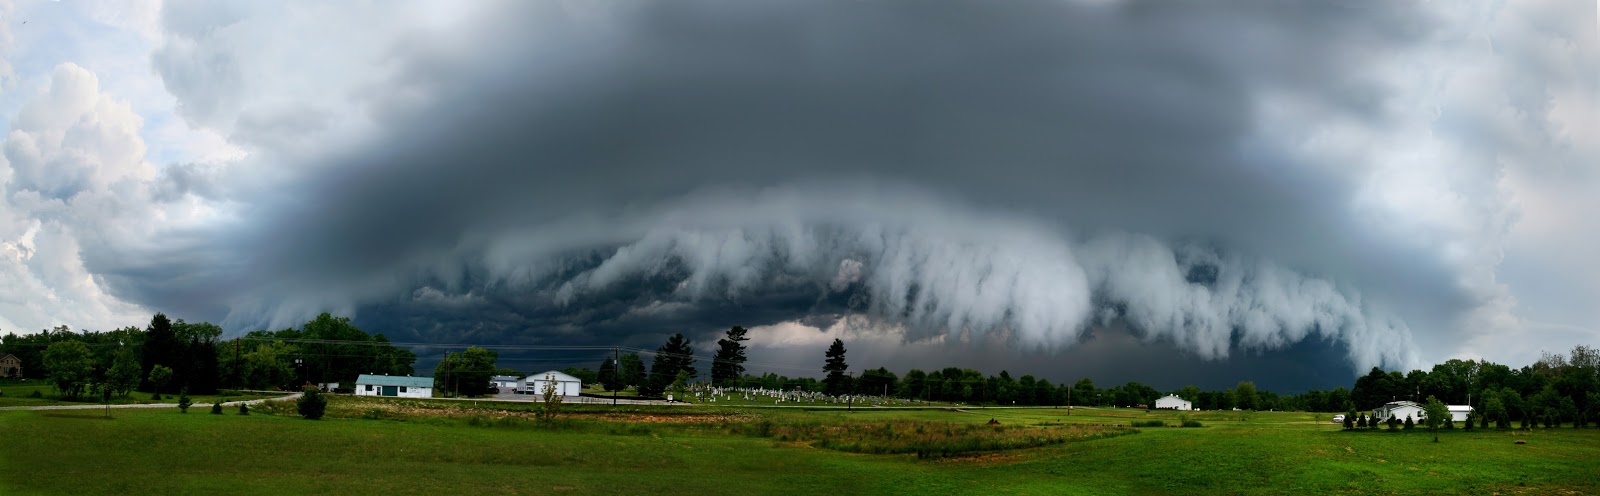 Shelf Cloud: They announce the thunderstorm, and their appearance scares.